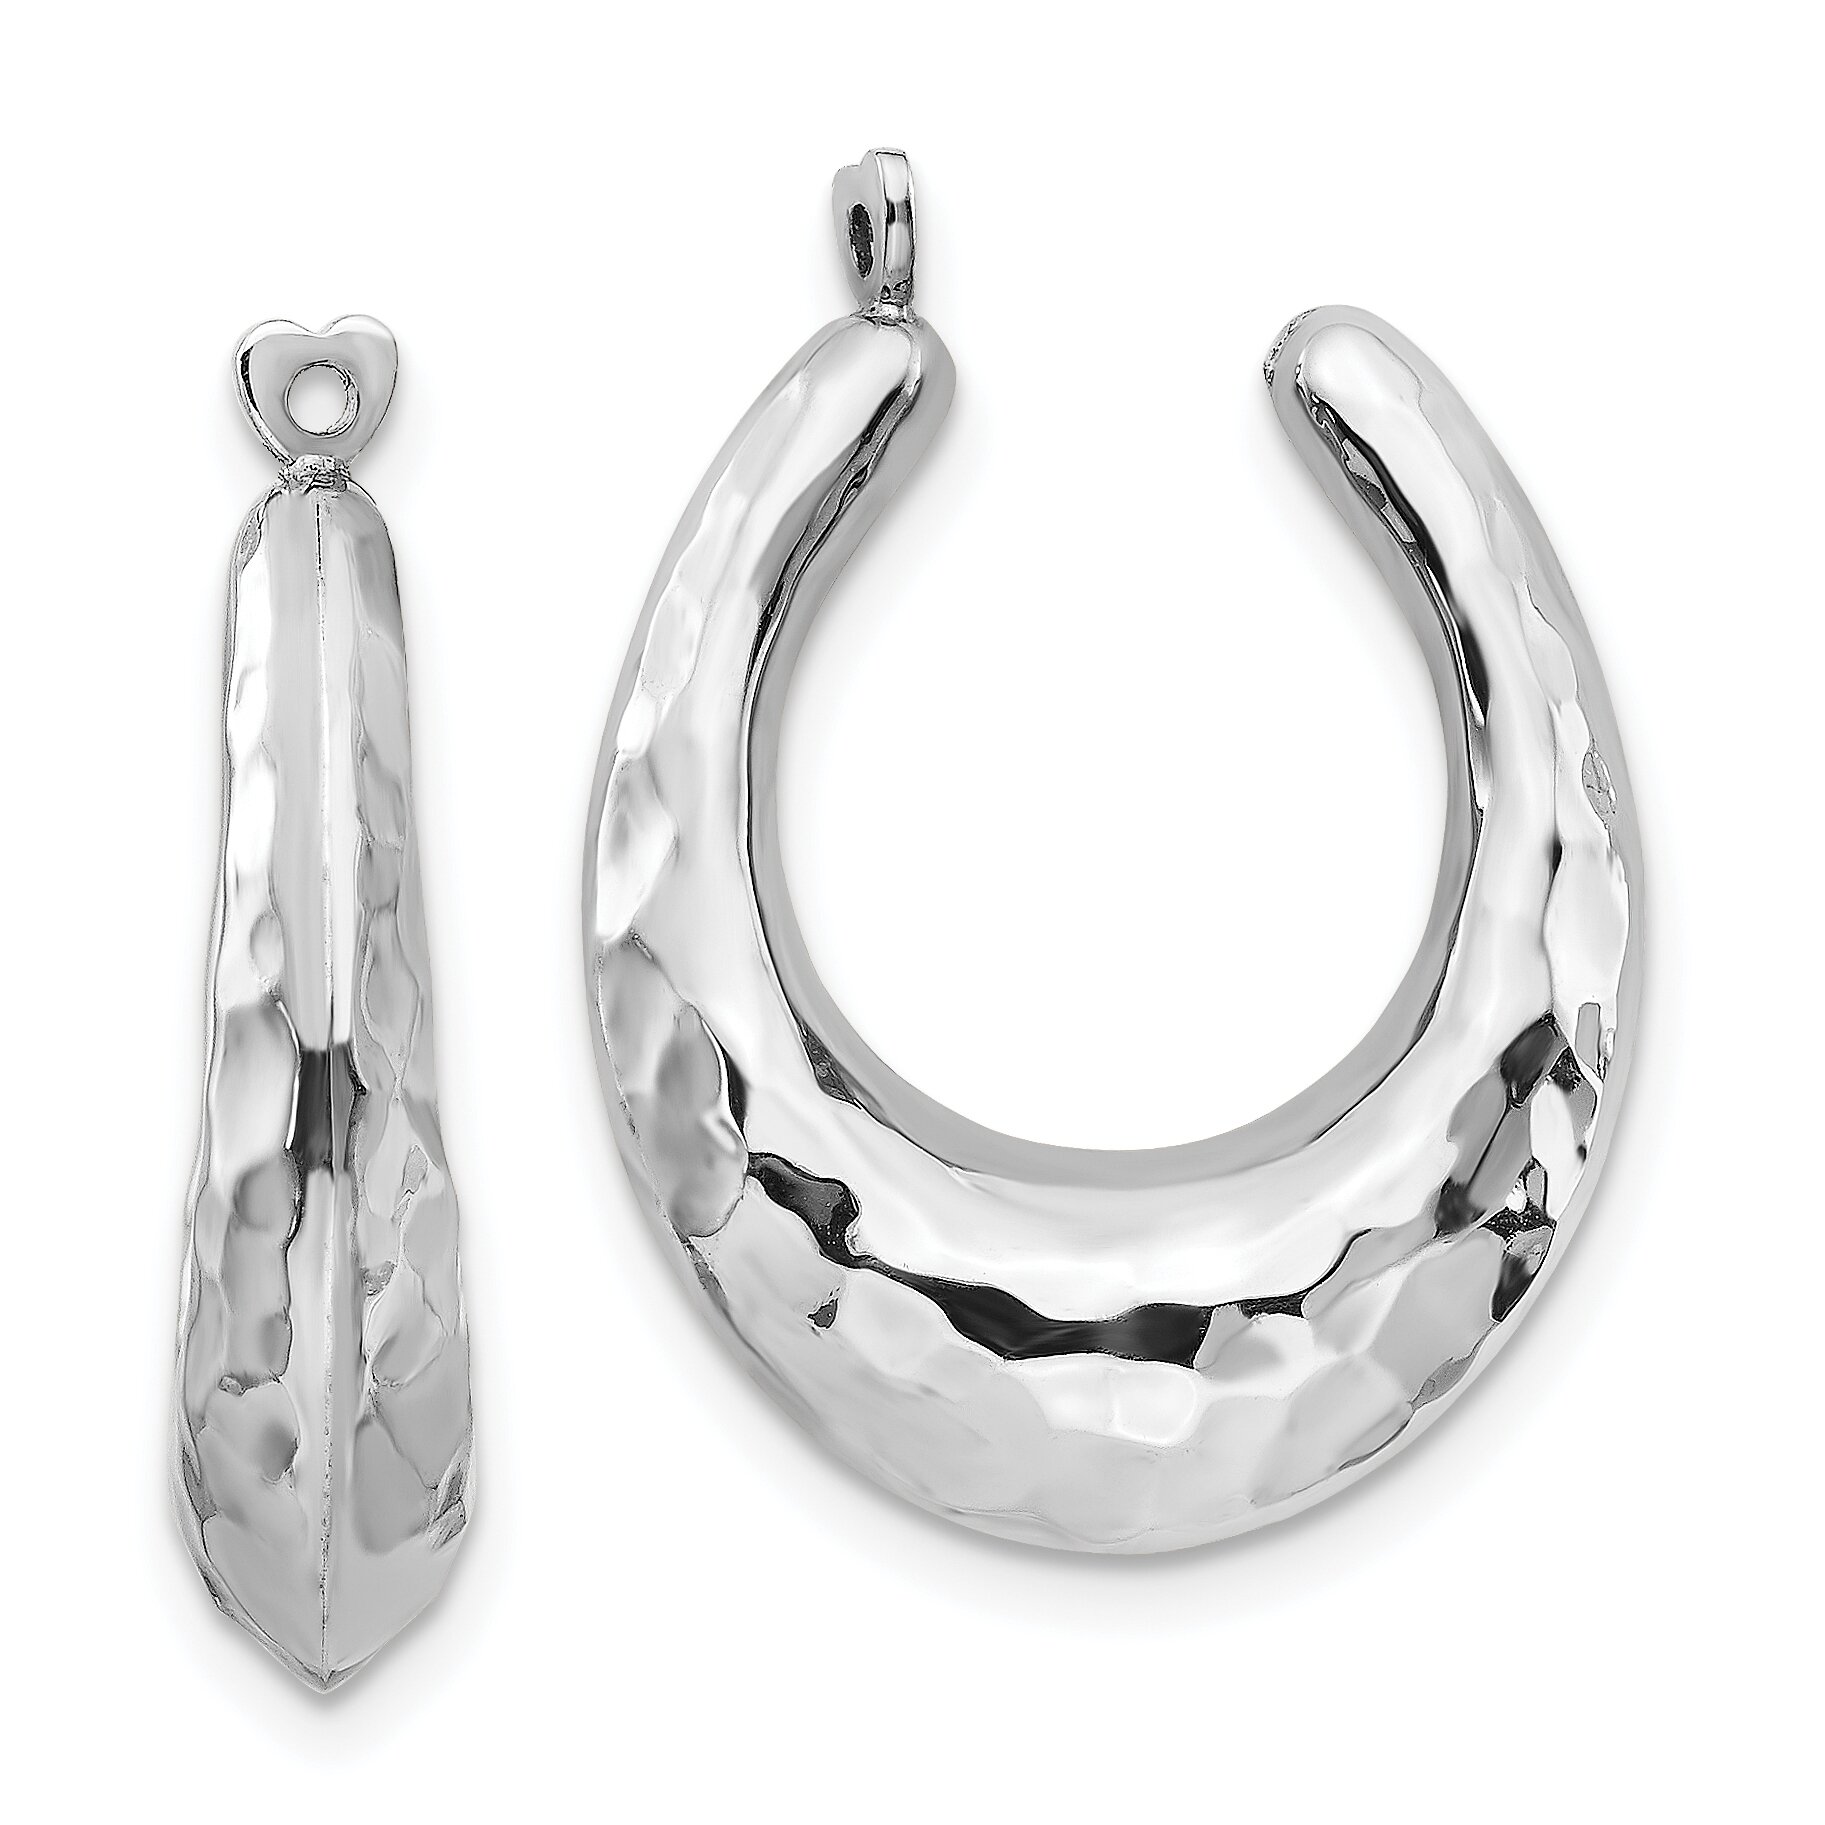 Findingking 14K White Gold Hammered Hoop Earring Jackets Jewelry